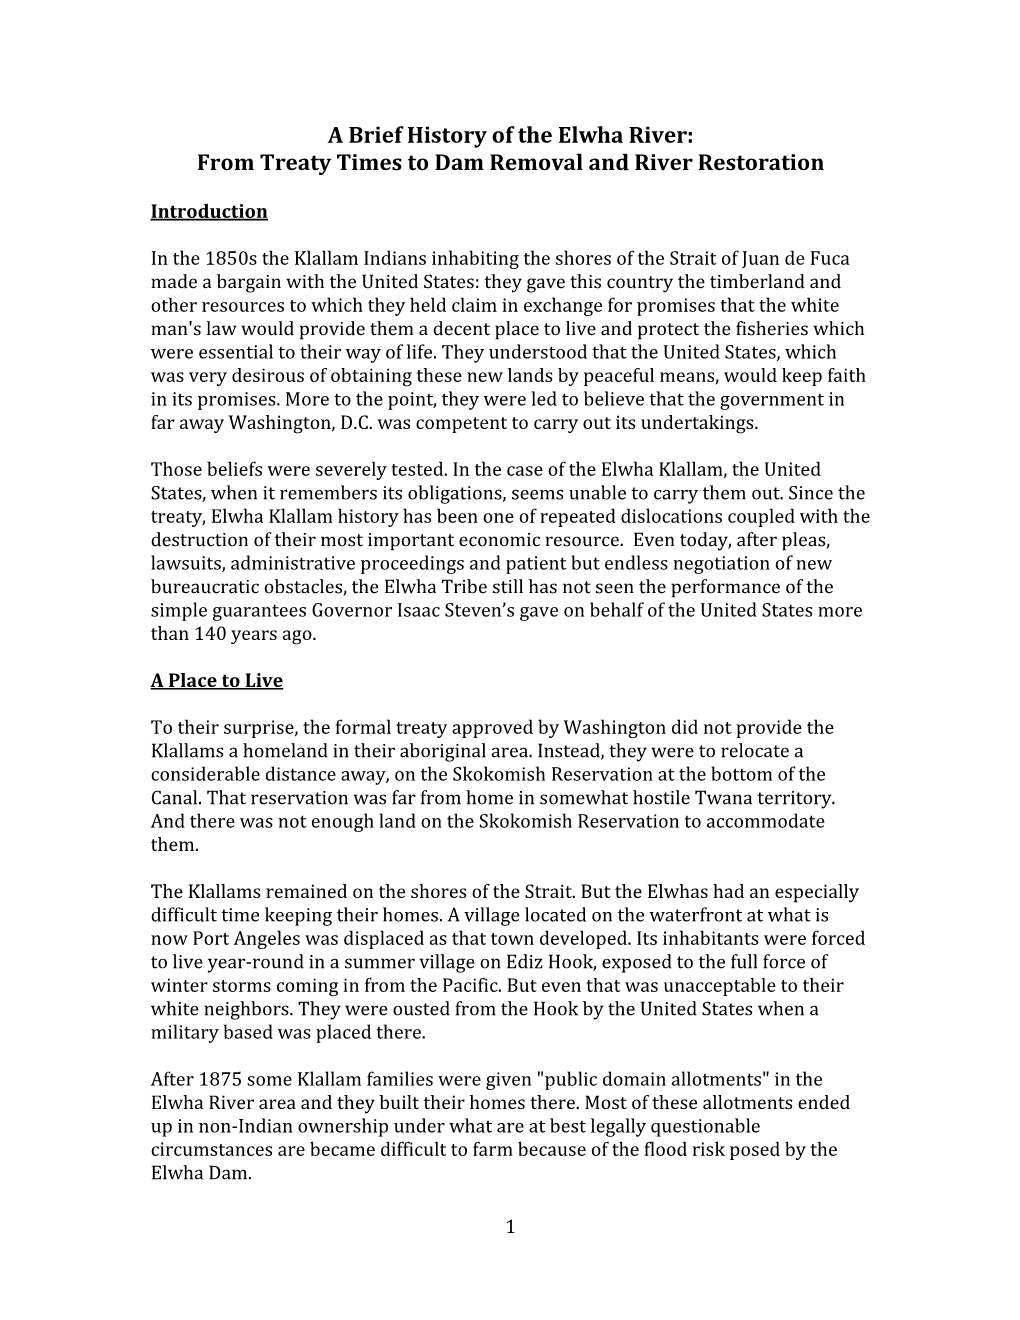 A Brief History of the Elwha River: from Treaty Times to Dam Removal and River Restoration